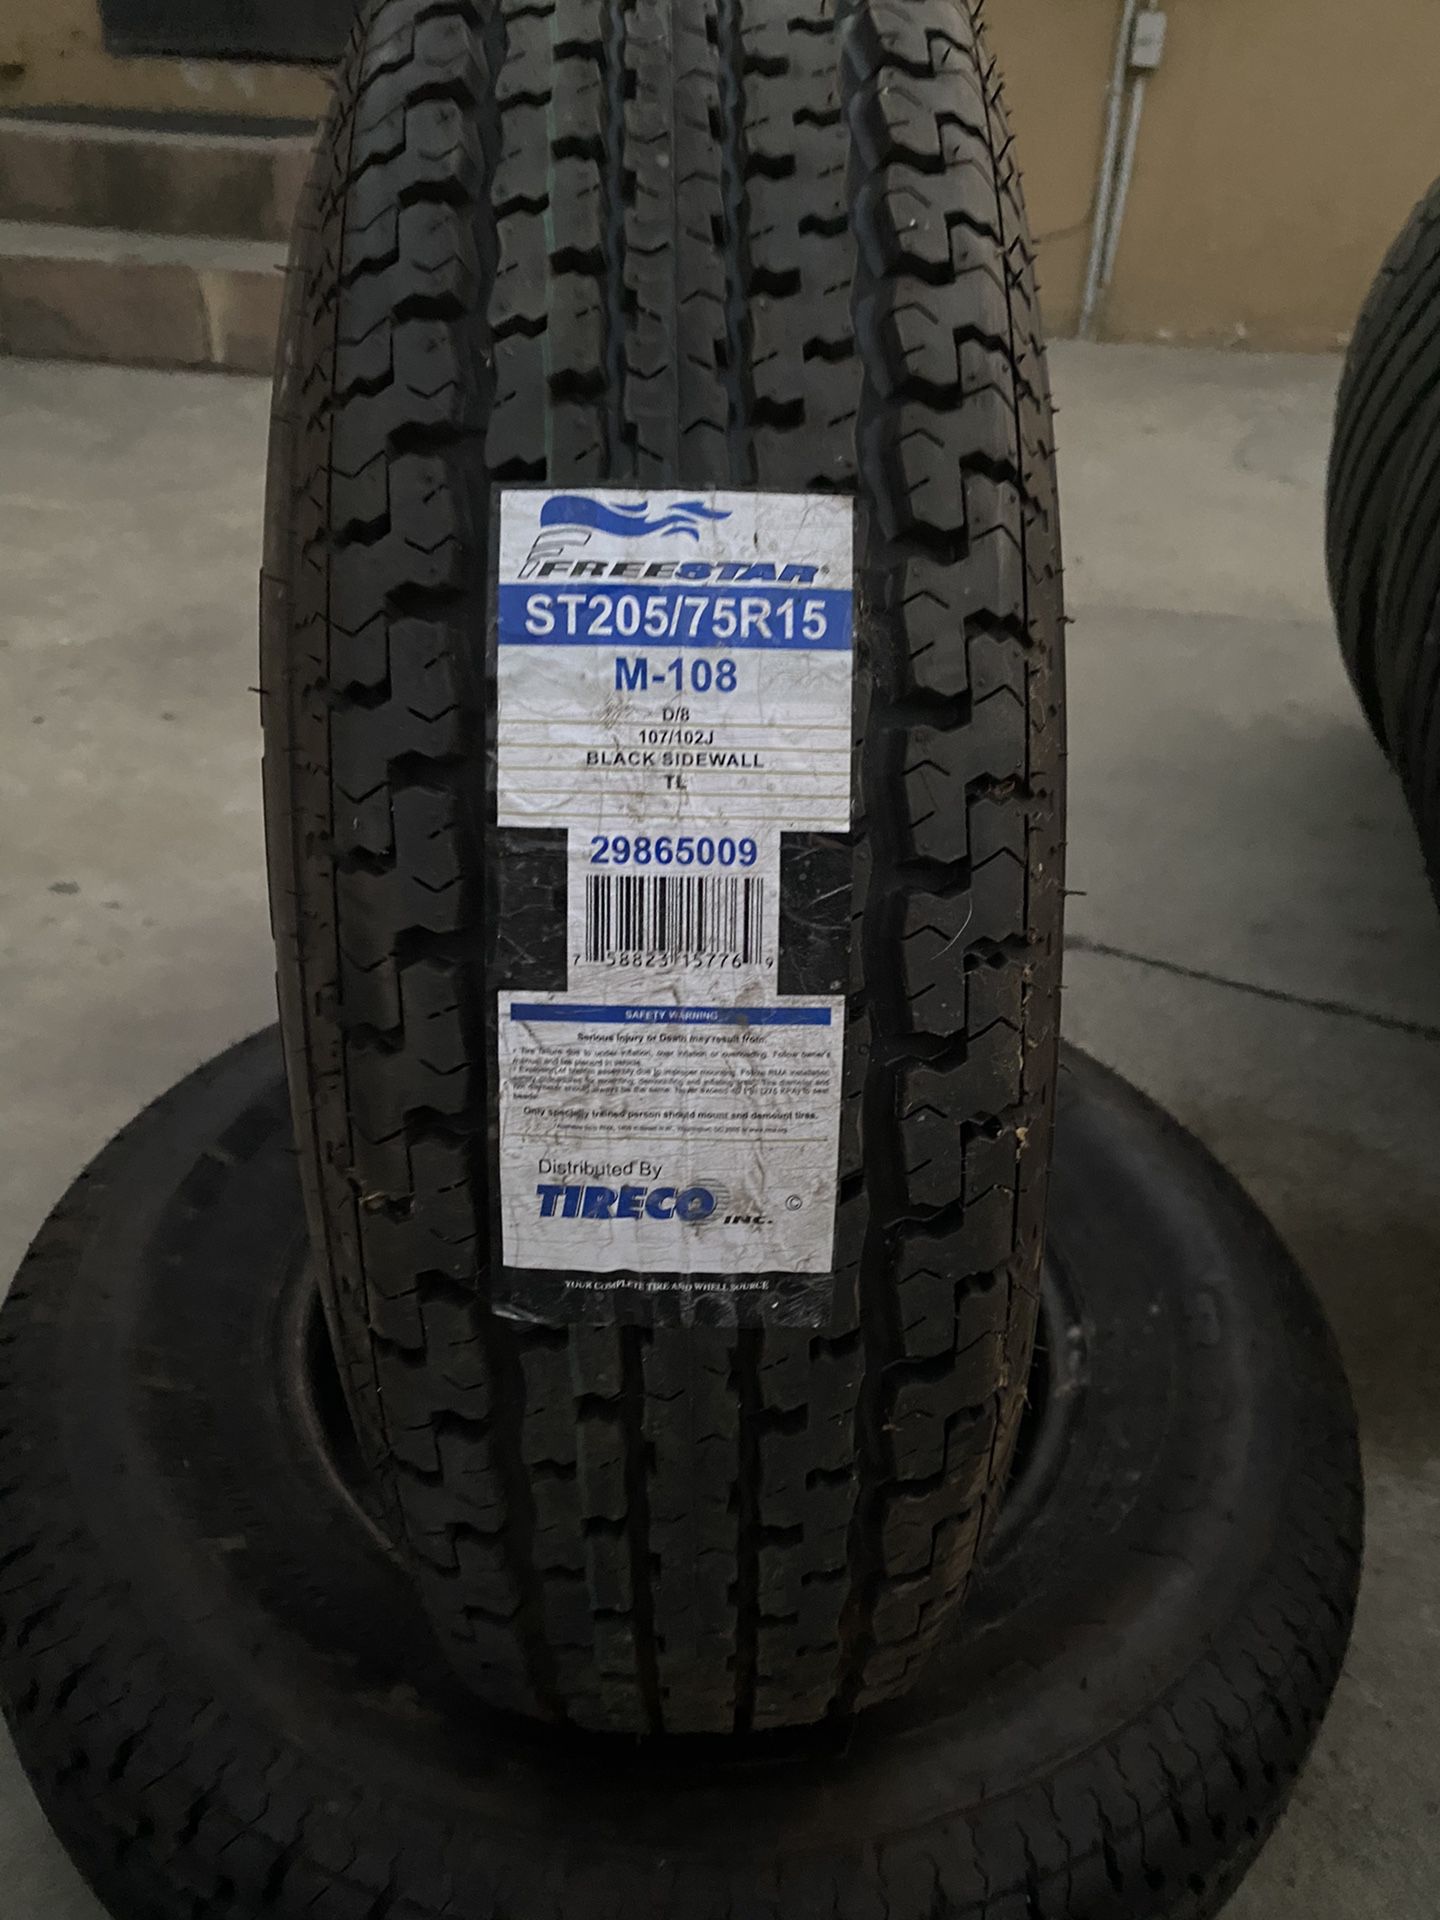 Tires for Sale ST205/75R15